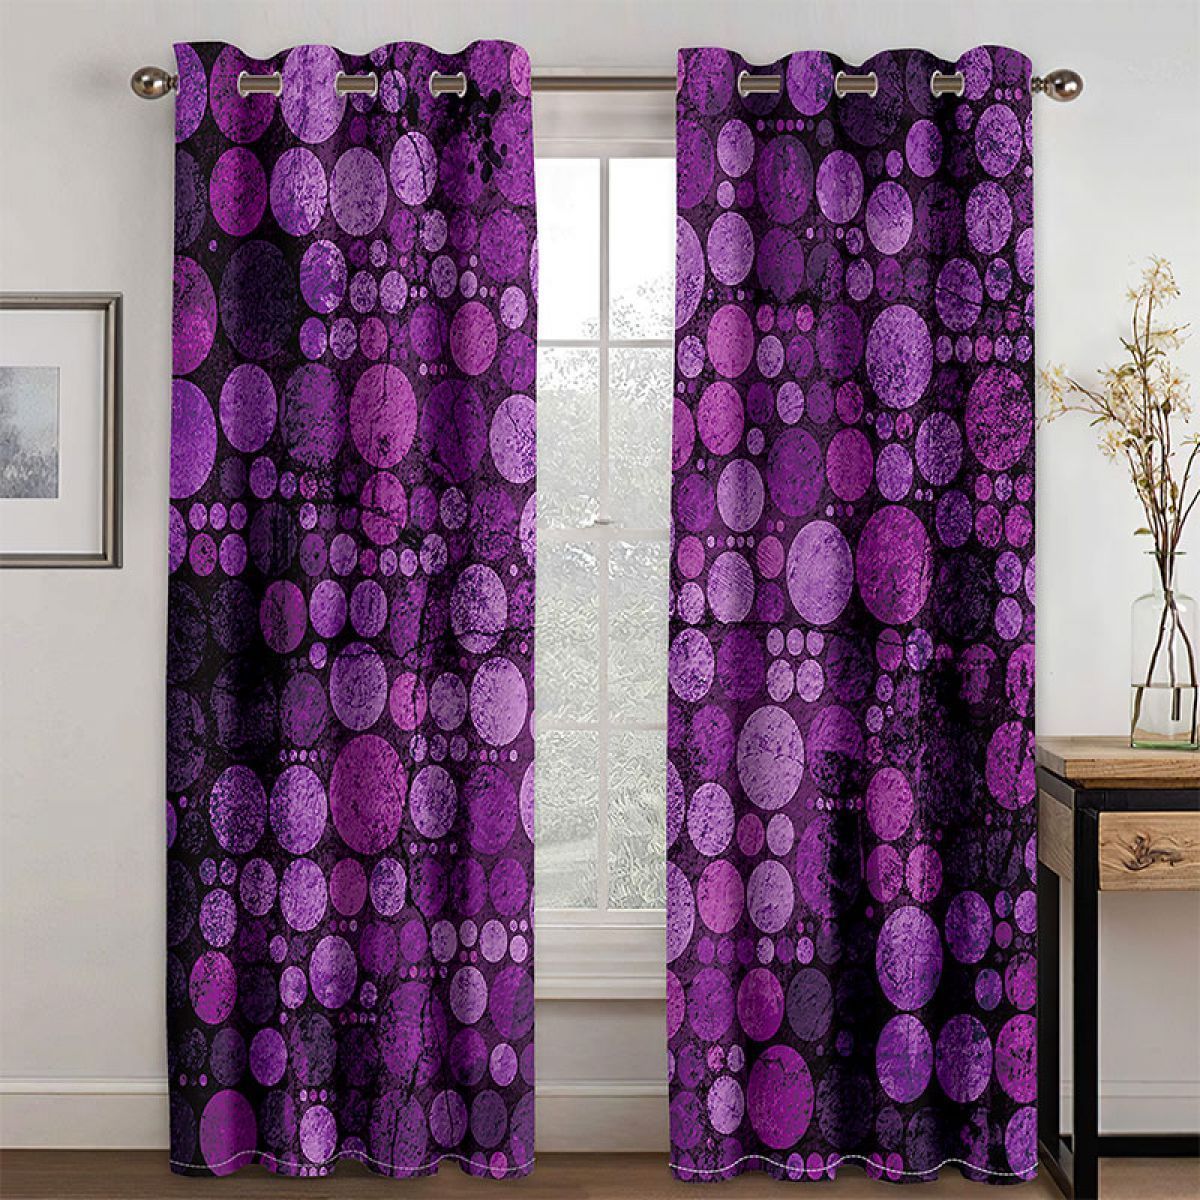 3d Purple Dotted Printed Window Curtain Home Decor